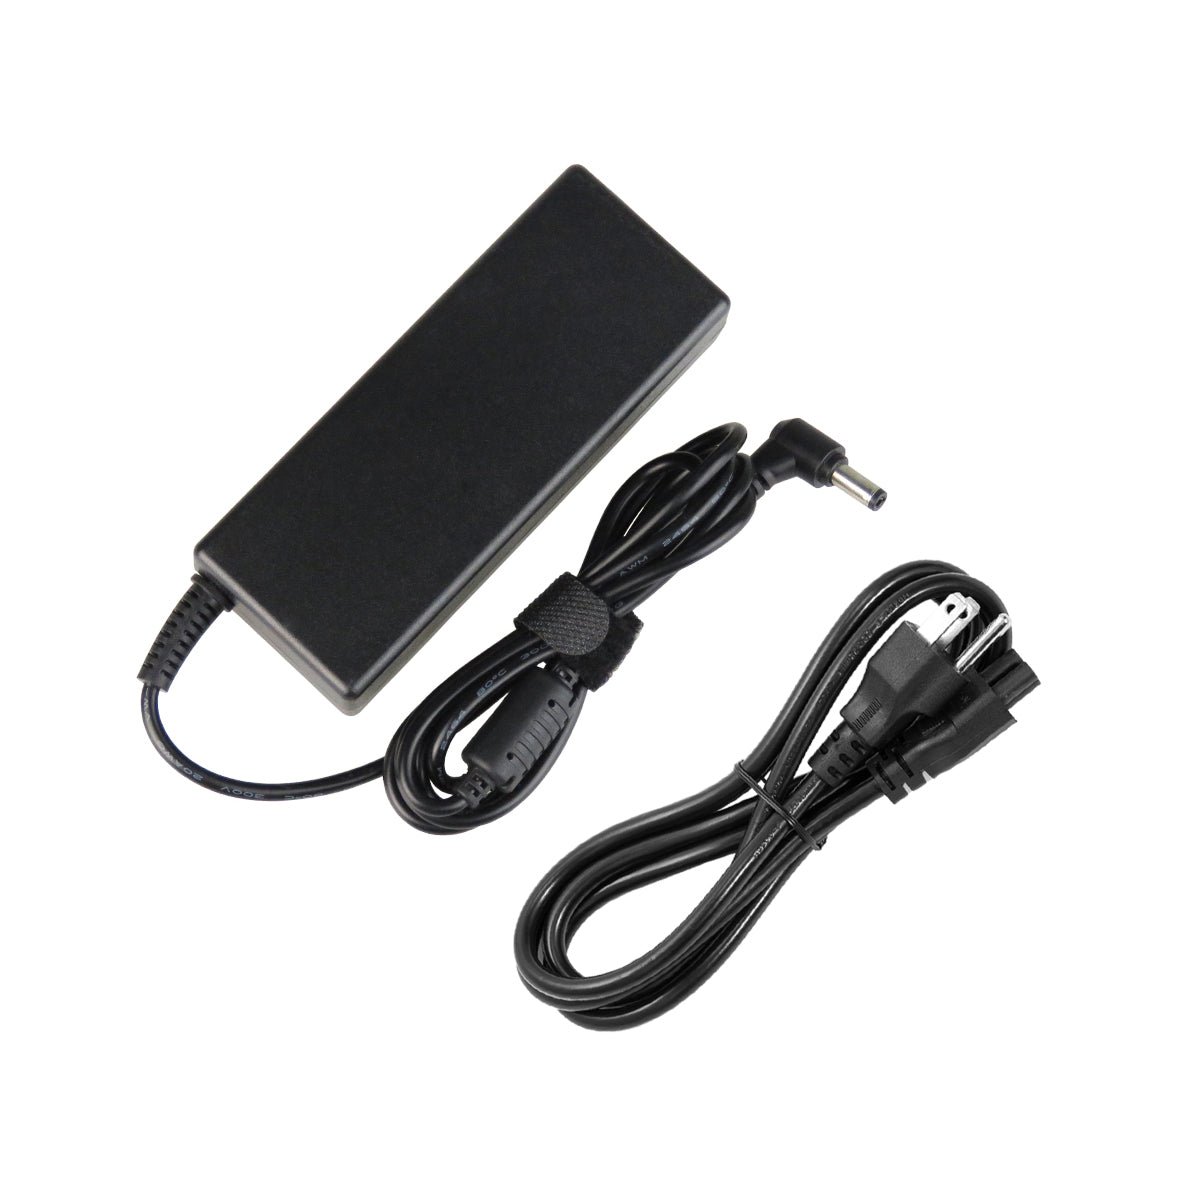 AC Adapter Charger for ASUS N73JG Notebook.